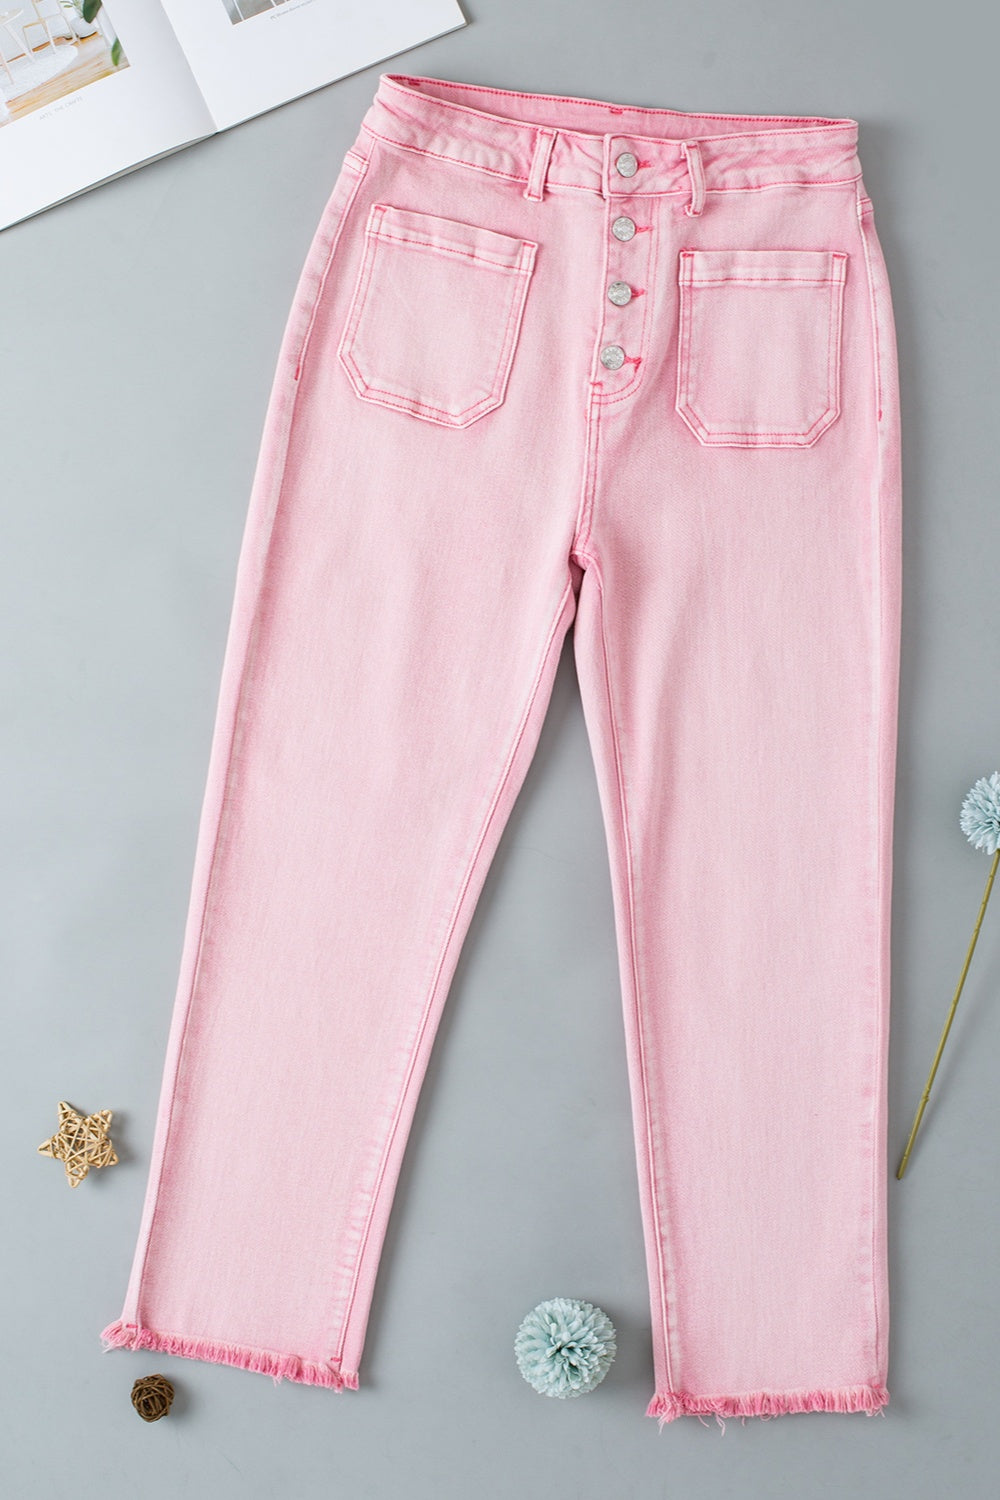 Whoopsie Daisy-Raw Hem Button-Fly Jeans with Pockets-Whoopsie Daisy